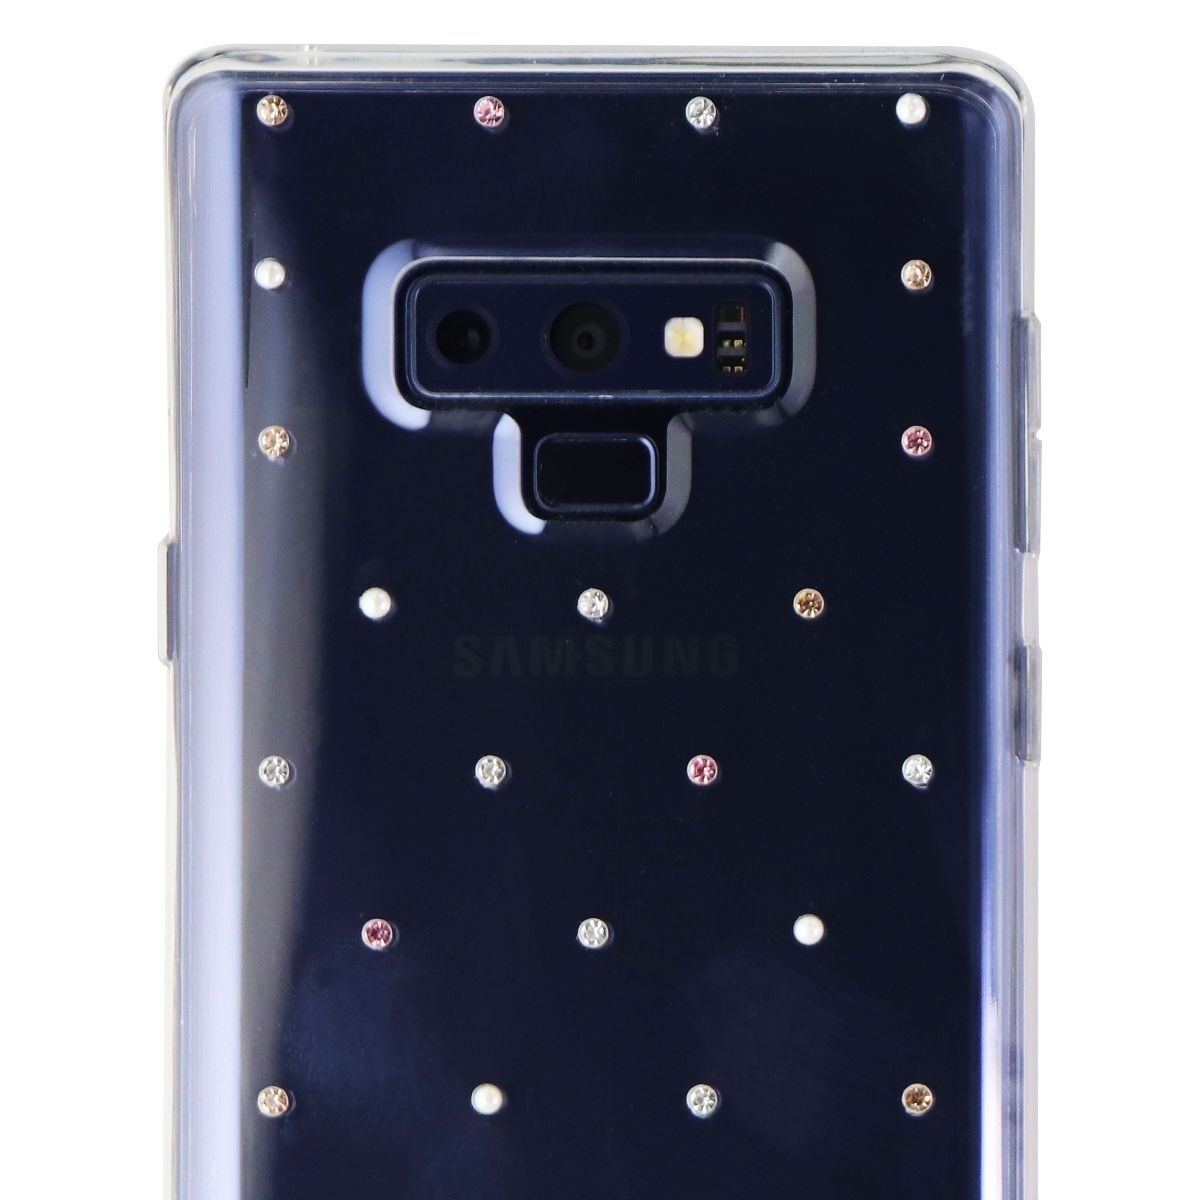 Kate Spade Hardshell Case For Samsung Galaxy Note9 - Clear With Pin Dot Gems